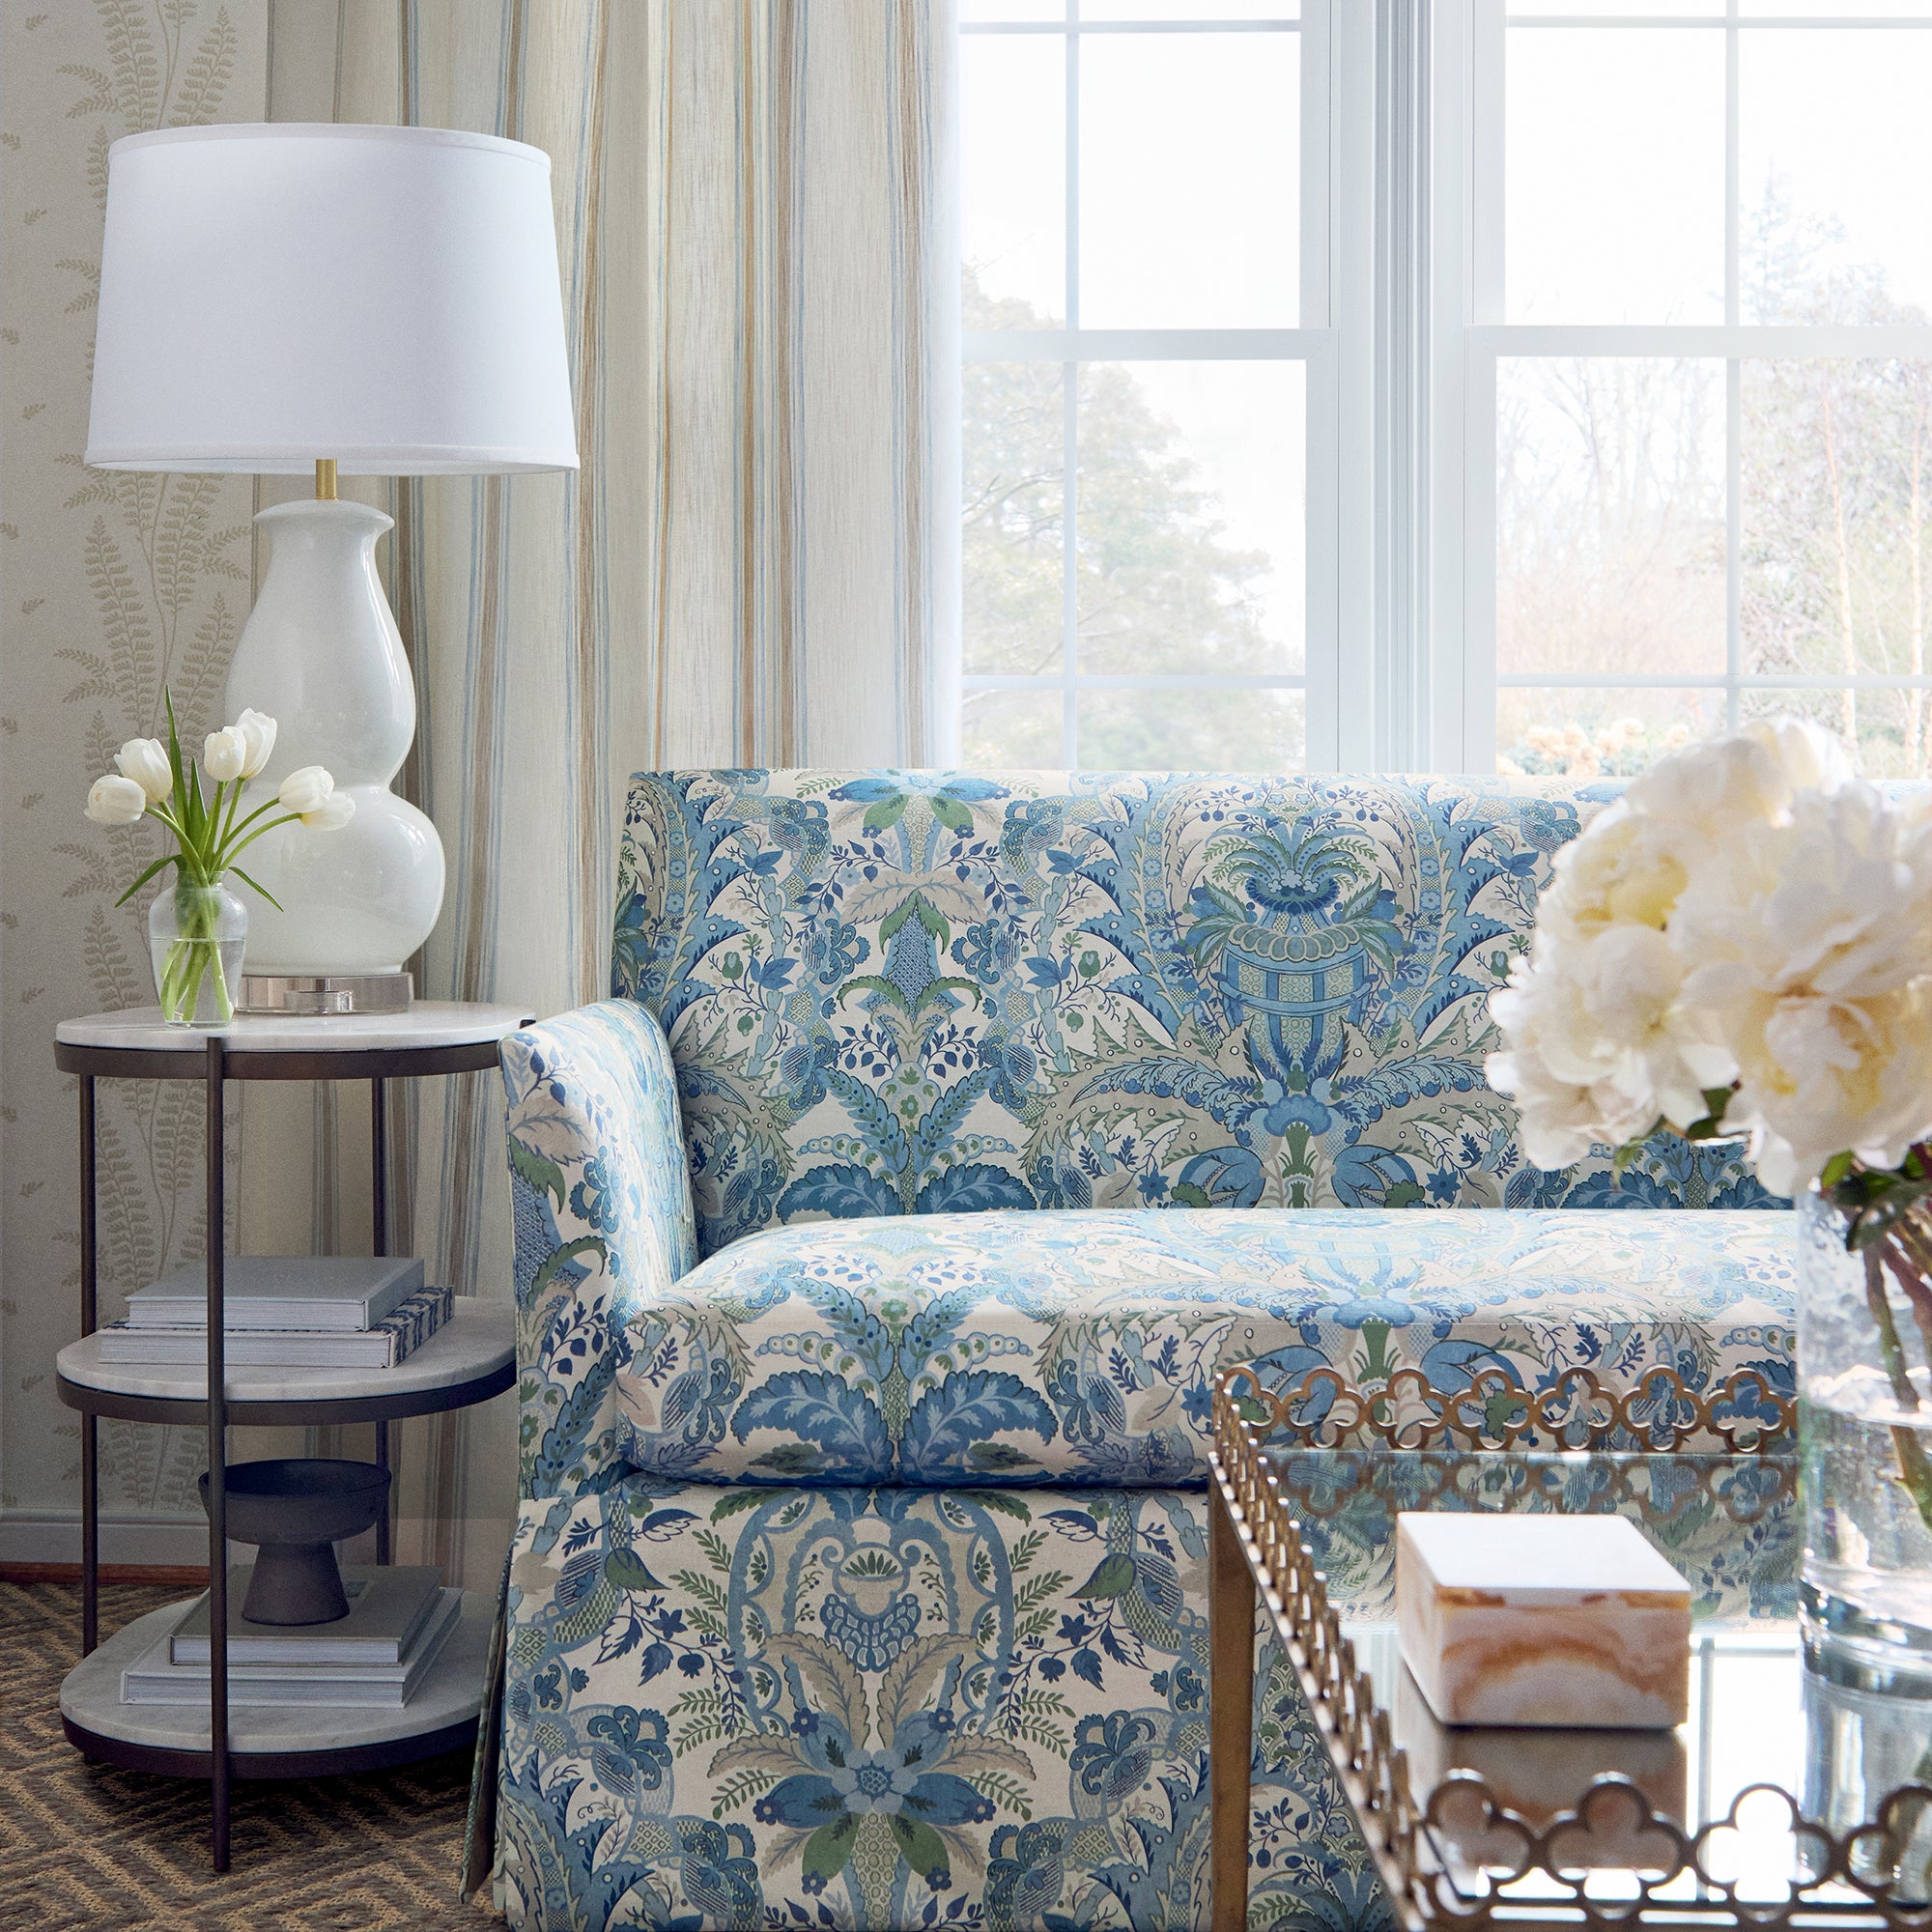 Detailed view of Addison Sofa with Skirt in Narbeth printed fabric in blue and green color variant by Anna French in the Bristol collection - pattern number AF57858